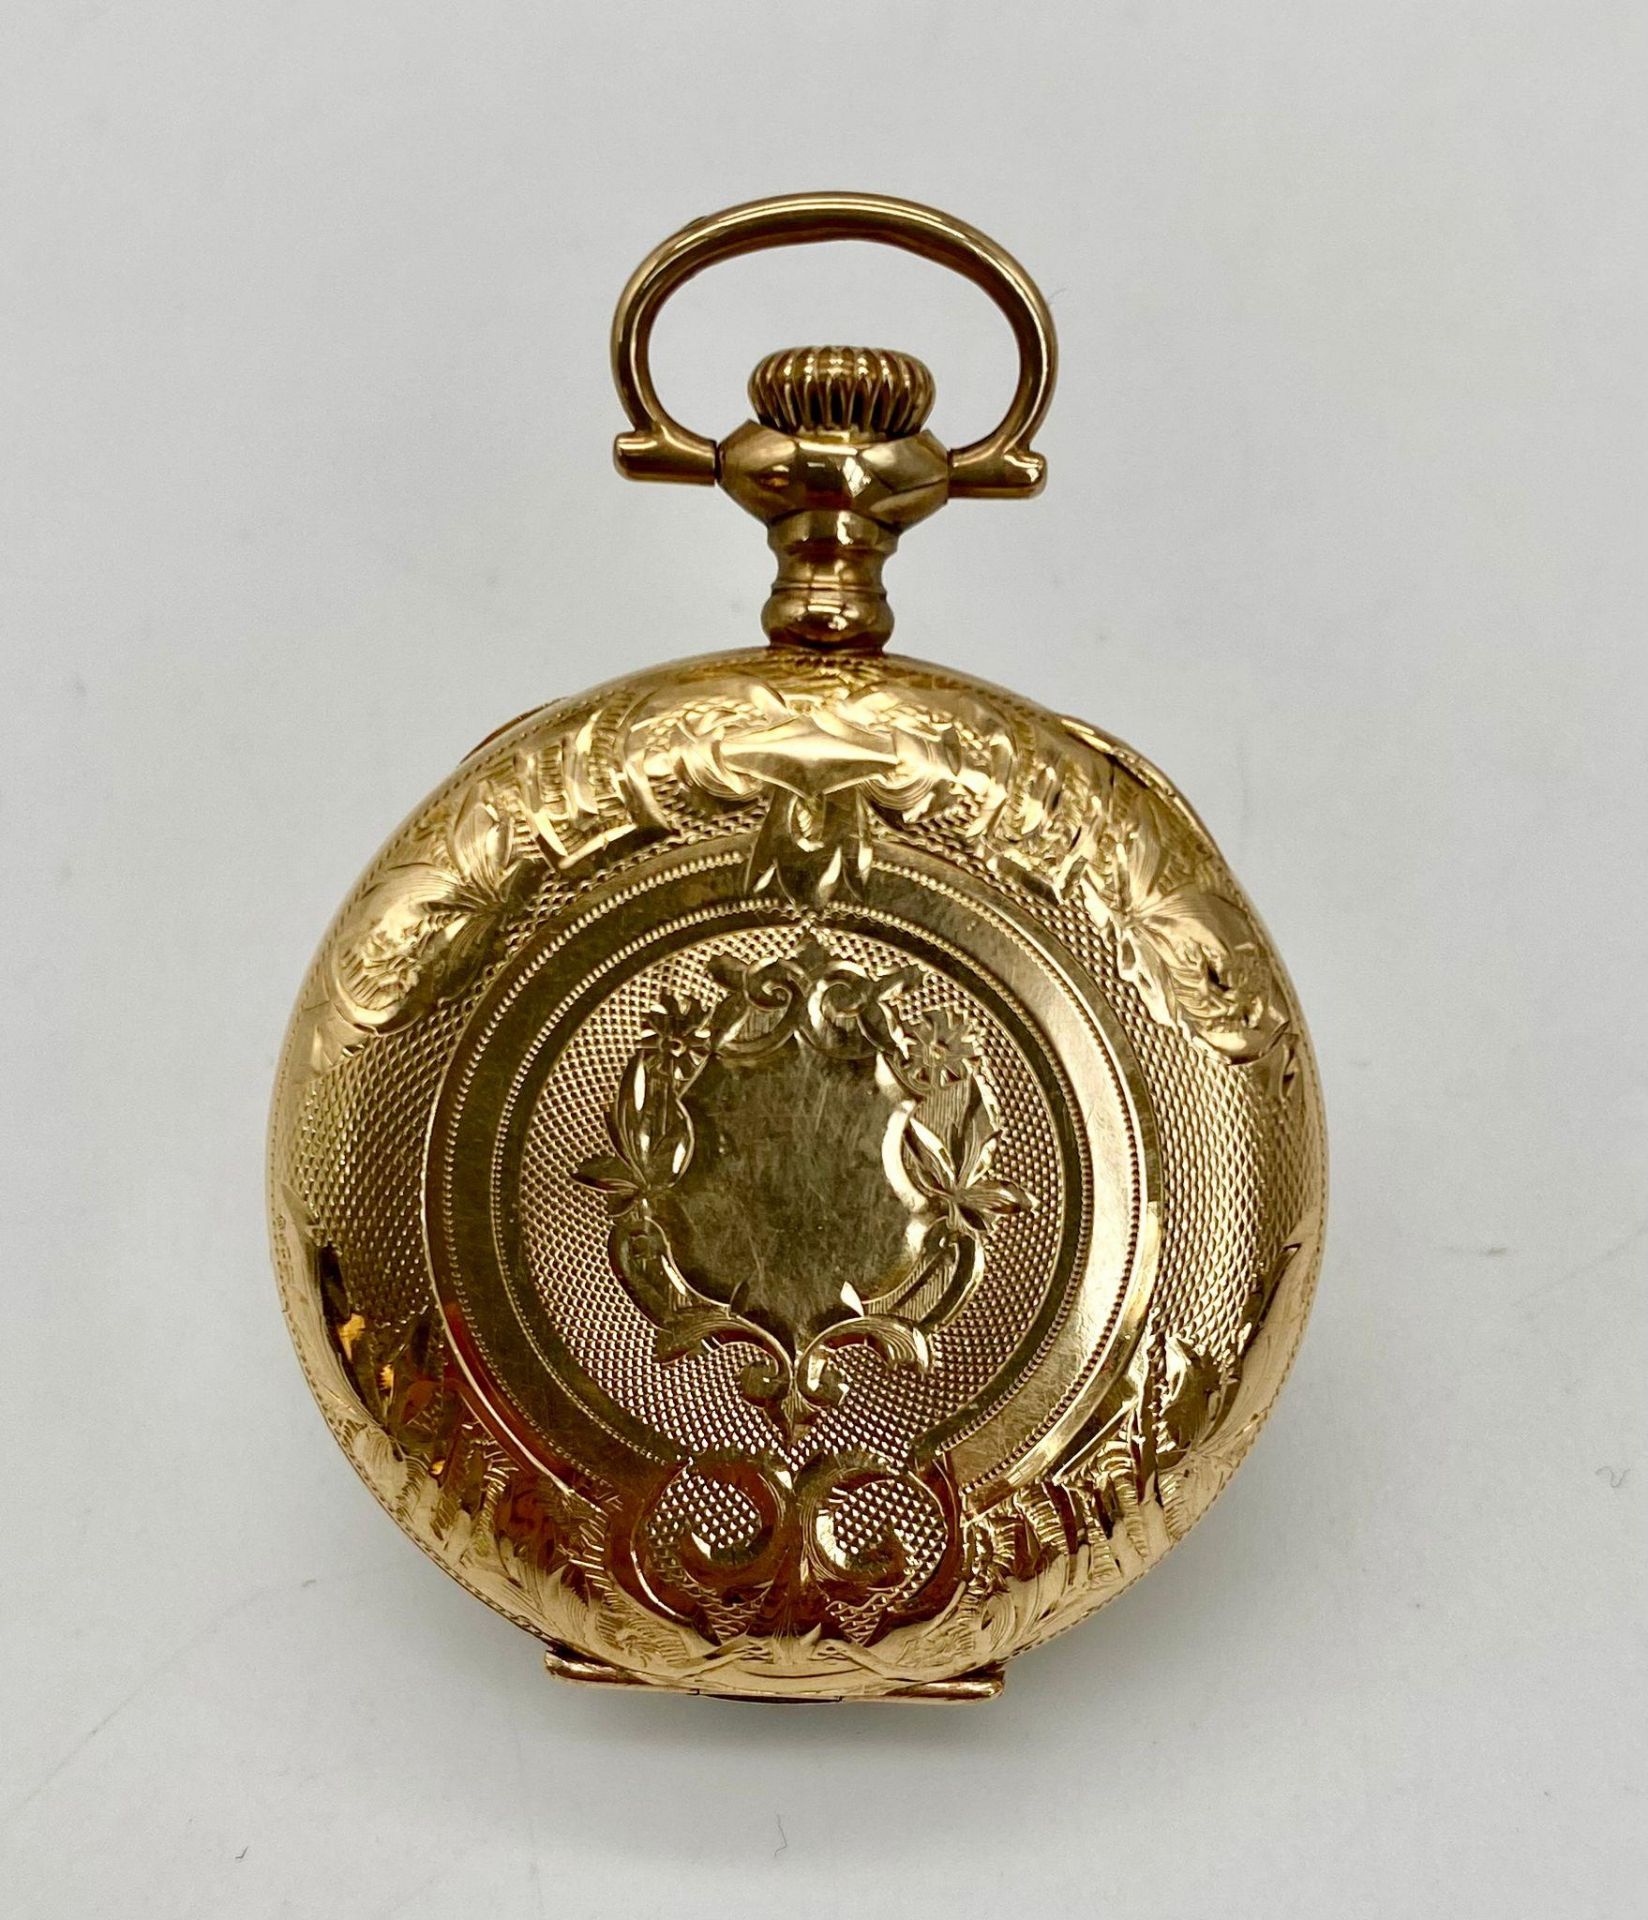 An Antique (1912) Small Elgin Gold Plated Pocket Watch. 15 jewels. 16578165 movement. Top winder. - Image 2 of 5